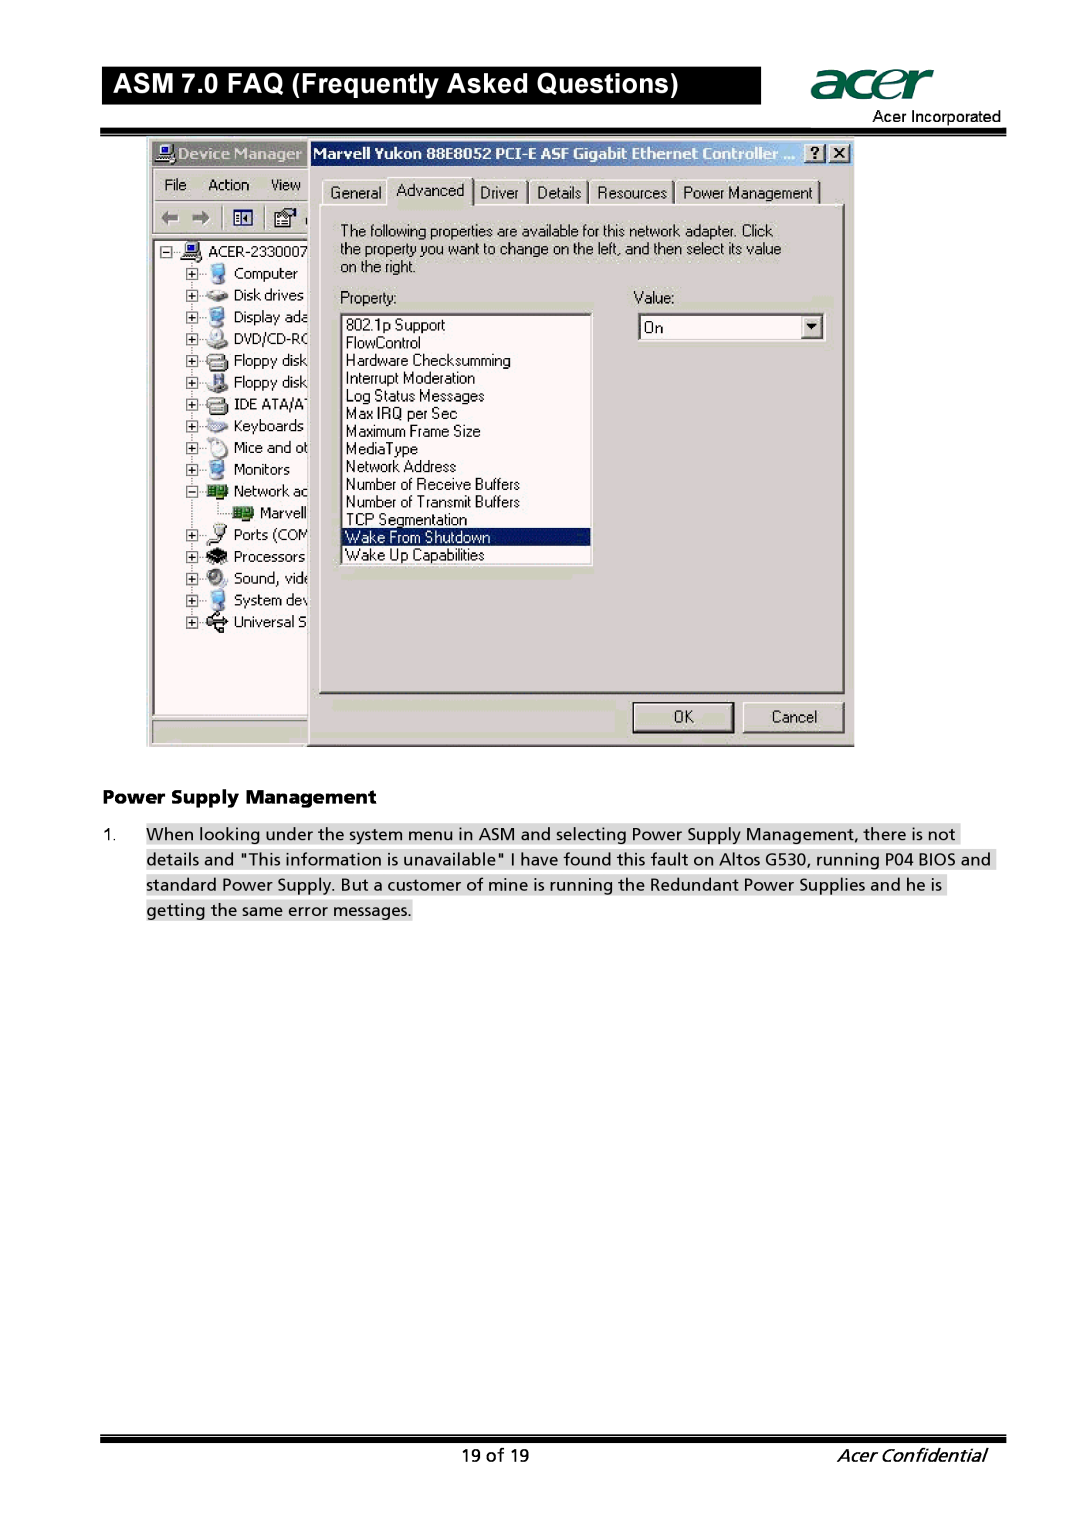 Acer manual Power Supply Management, ASM 7.0 FAQ Frequently Asked Questions, Acer Confidential 